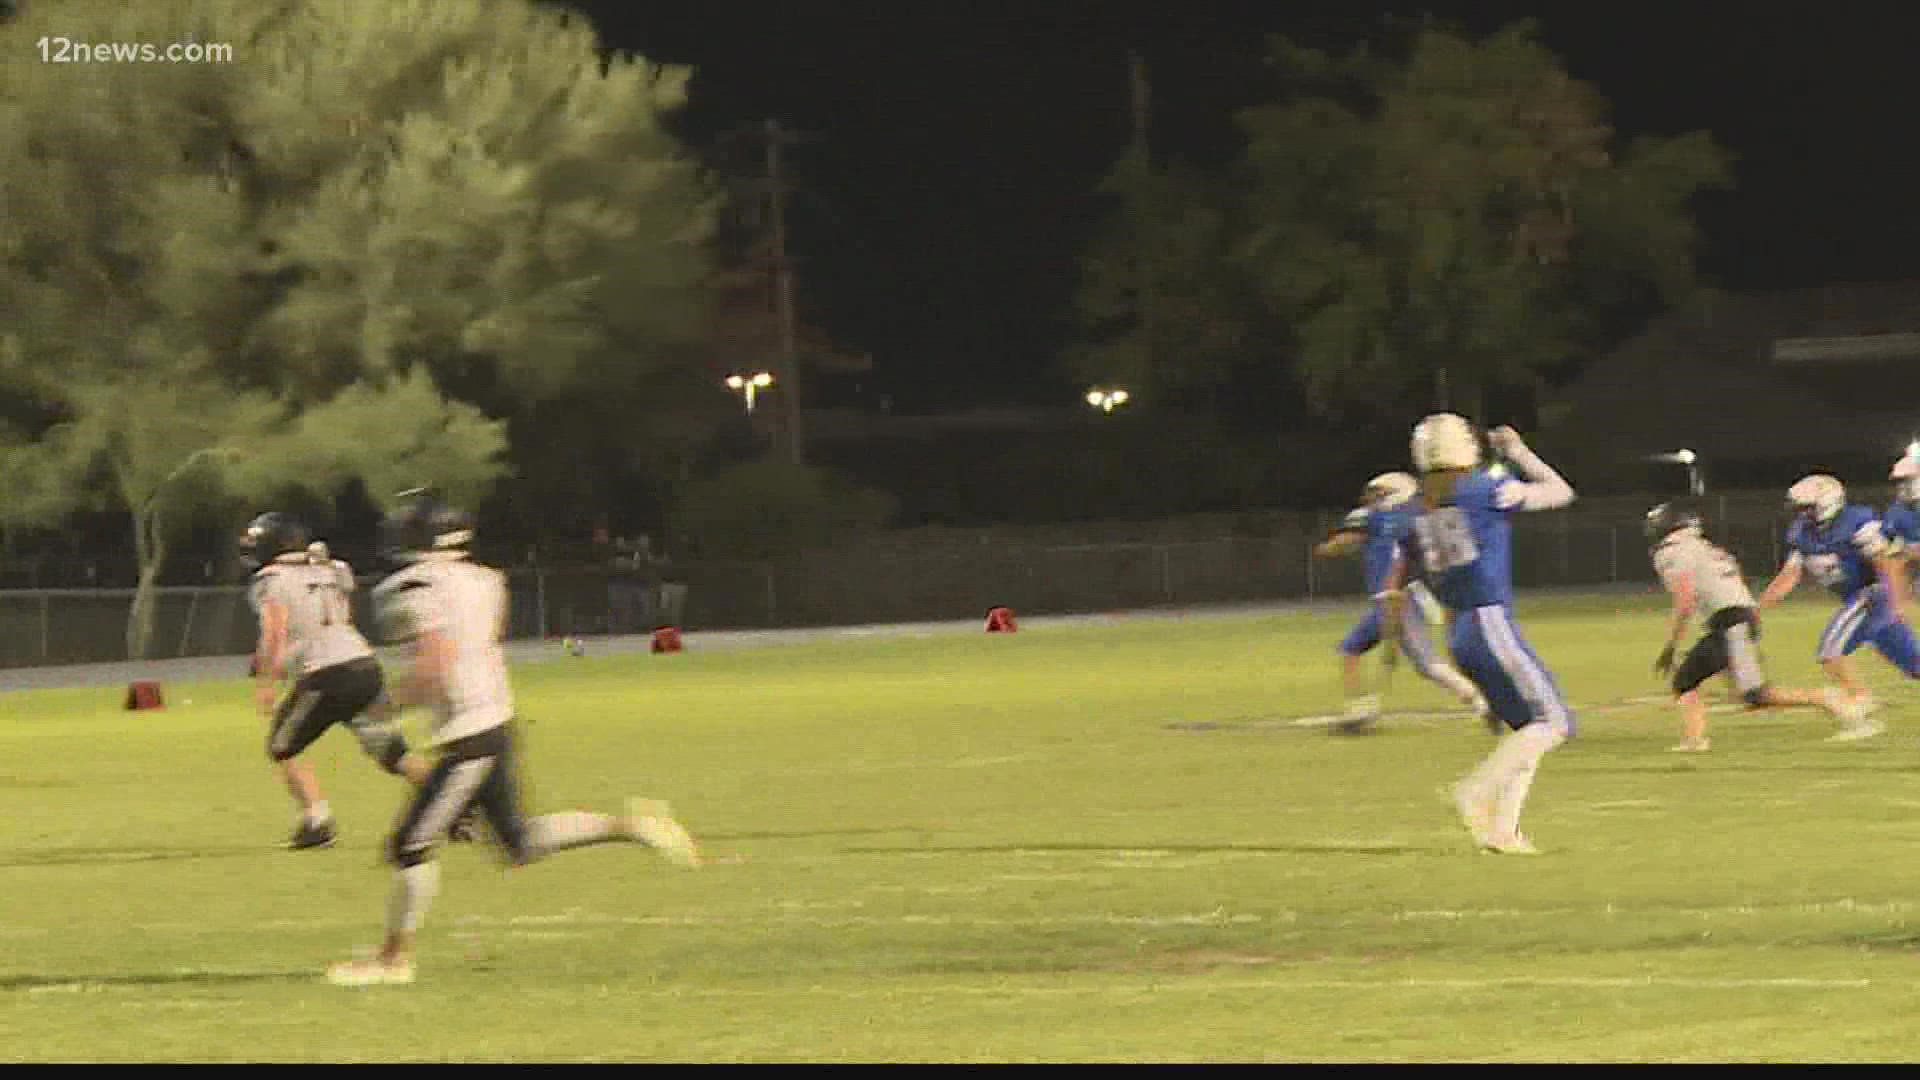 Valley Christian remains undefeated after taking on Gilbert Christian. Ending week two with a 49-8 final.